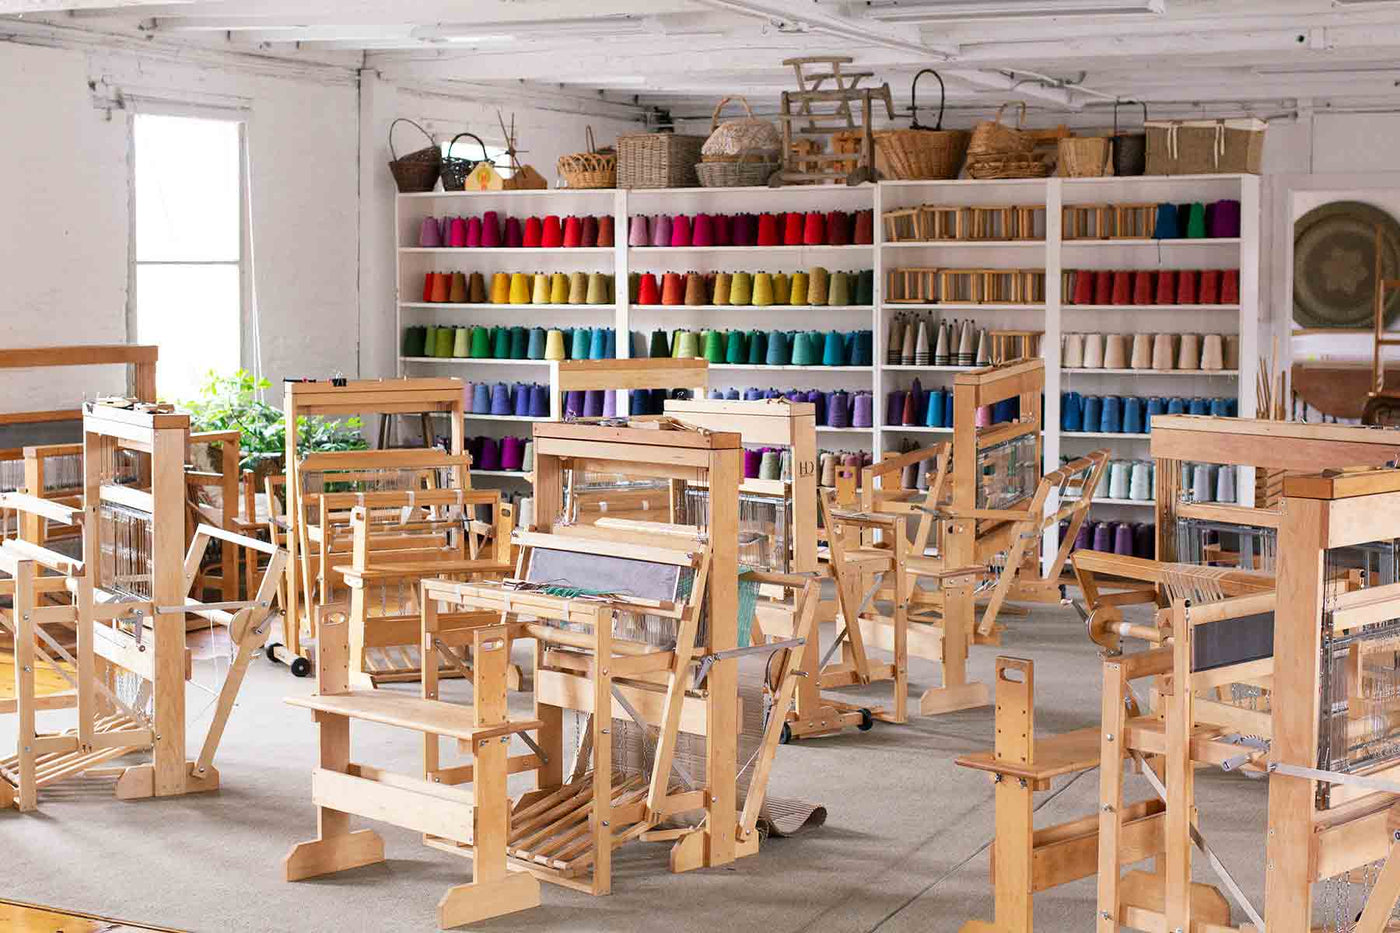 Weaving studio with a multicolored yarn wall and several floor looms